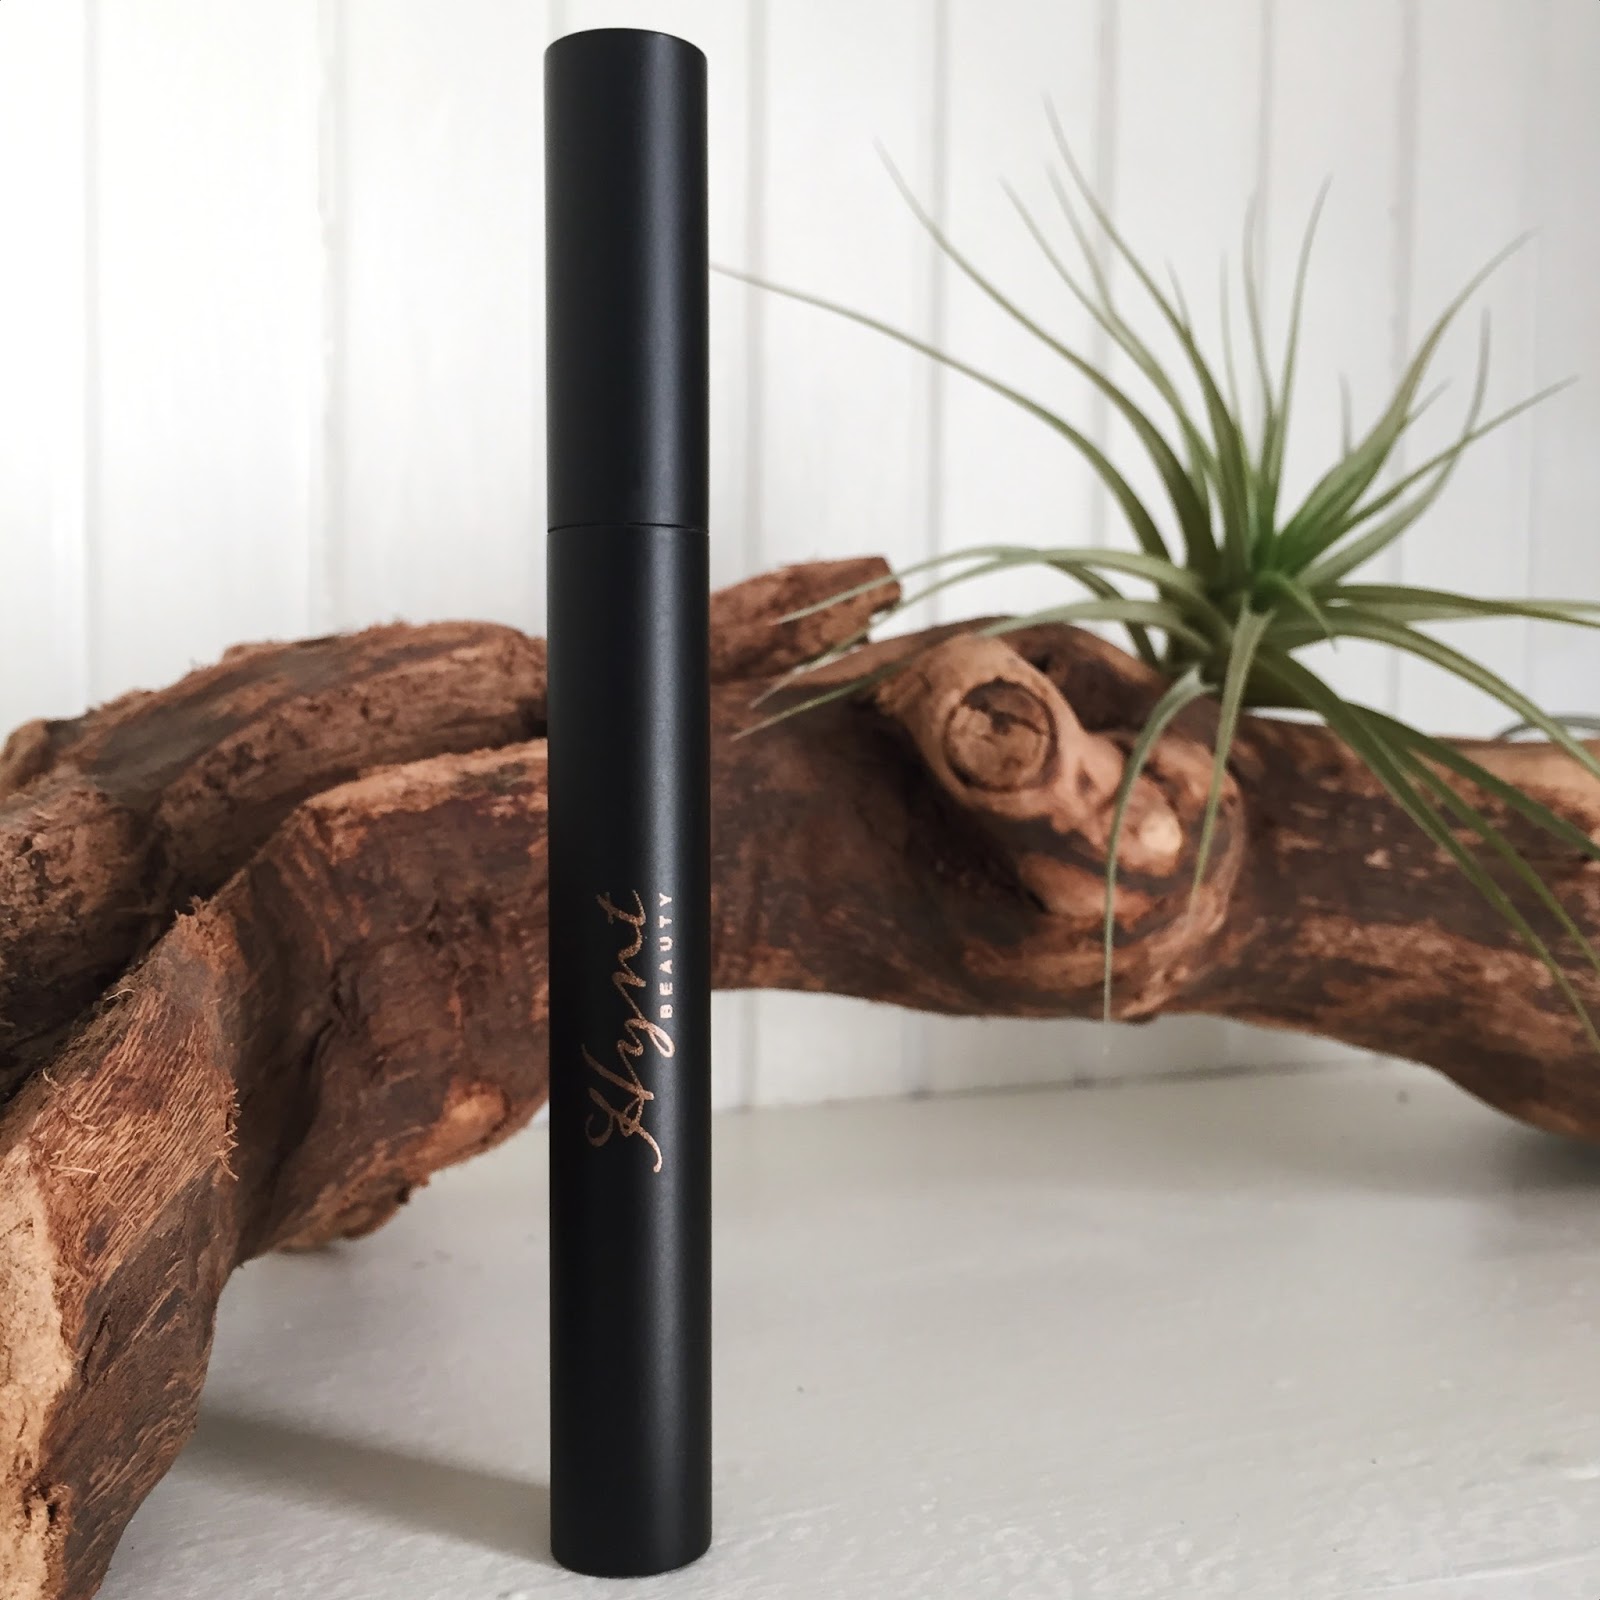 Hynt Beauty Nocturne Mascara Review